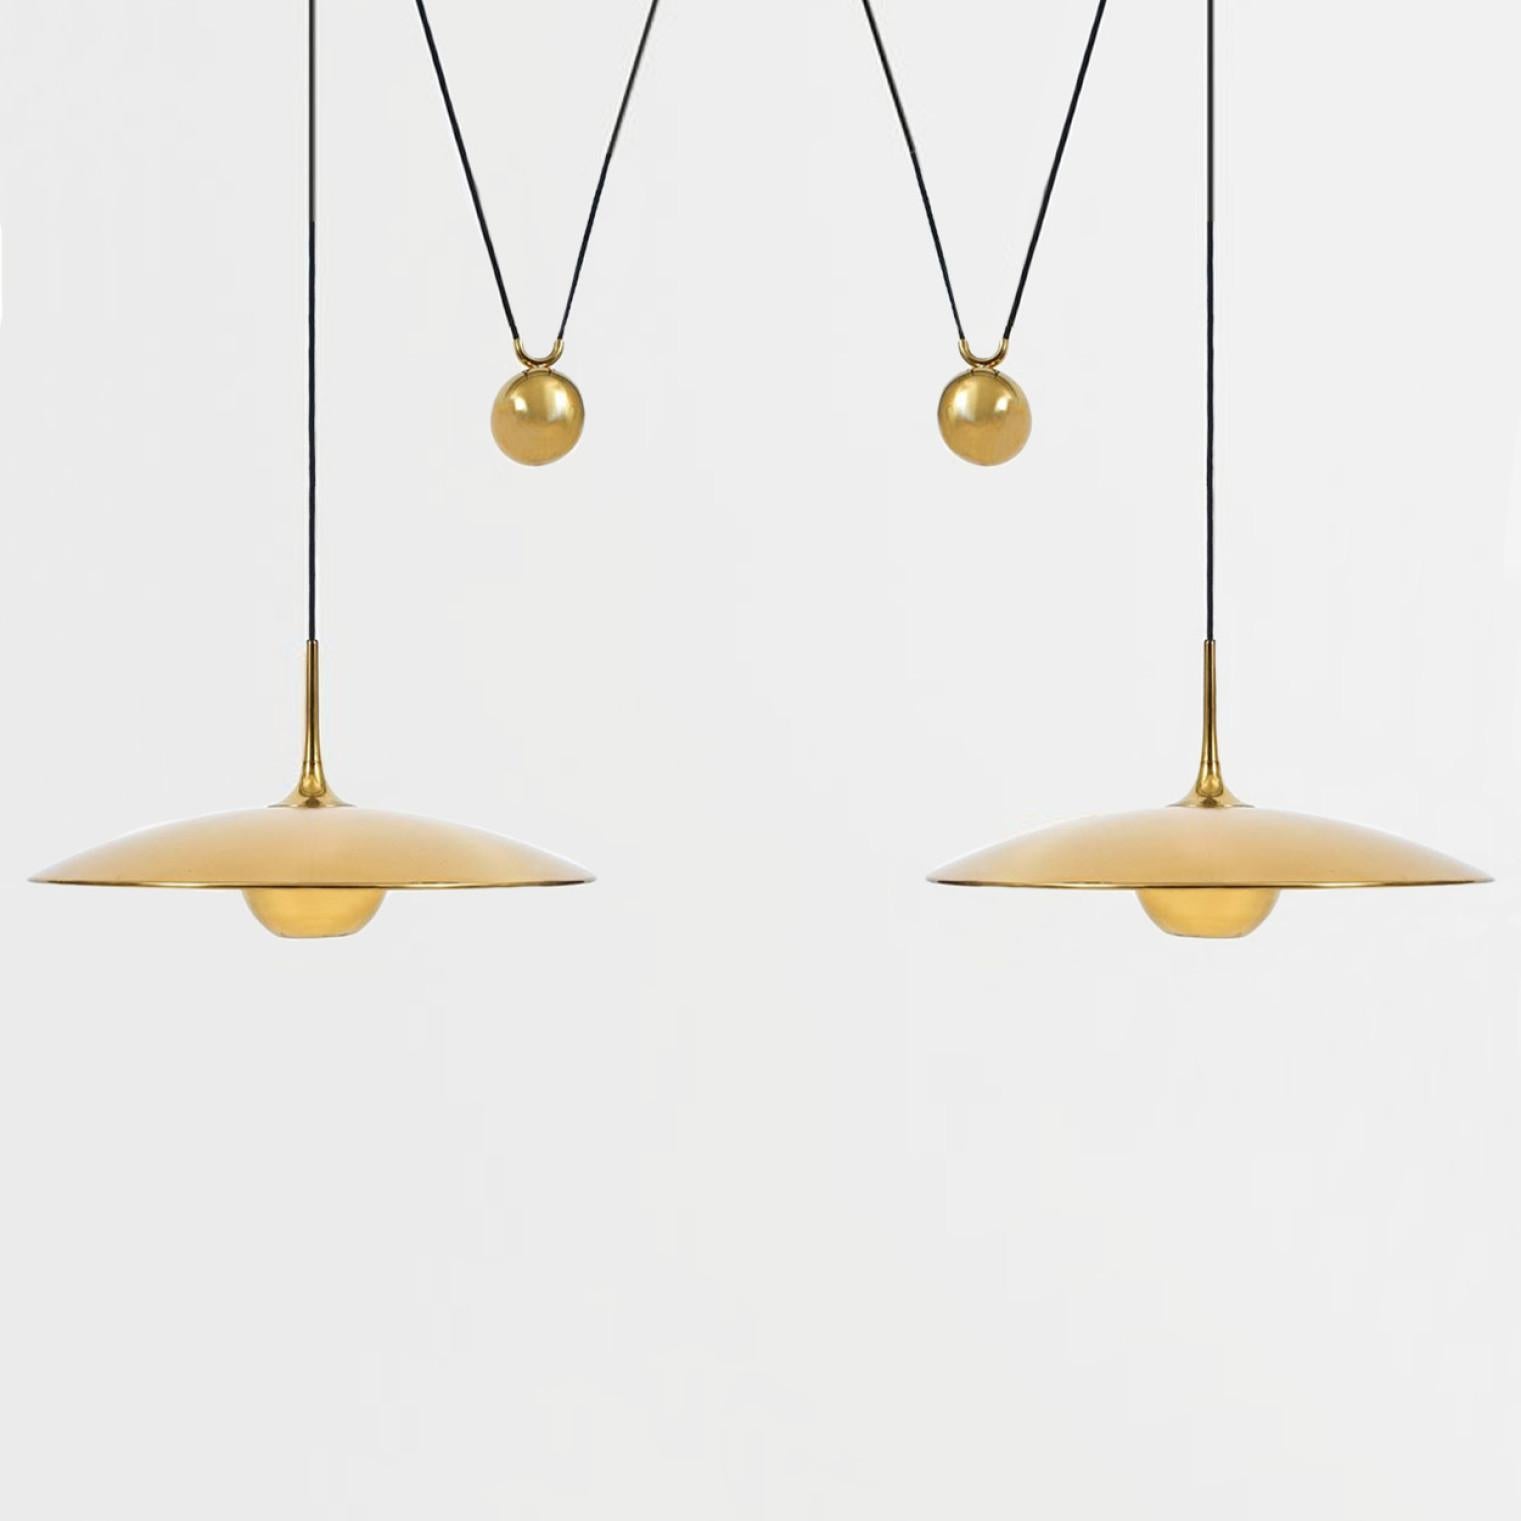 Polished Onos 55 Double Pull Brass Pendant Lamp by Florian Schulz, Germany